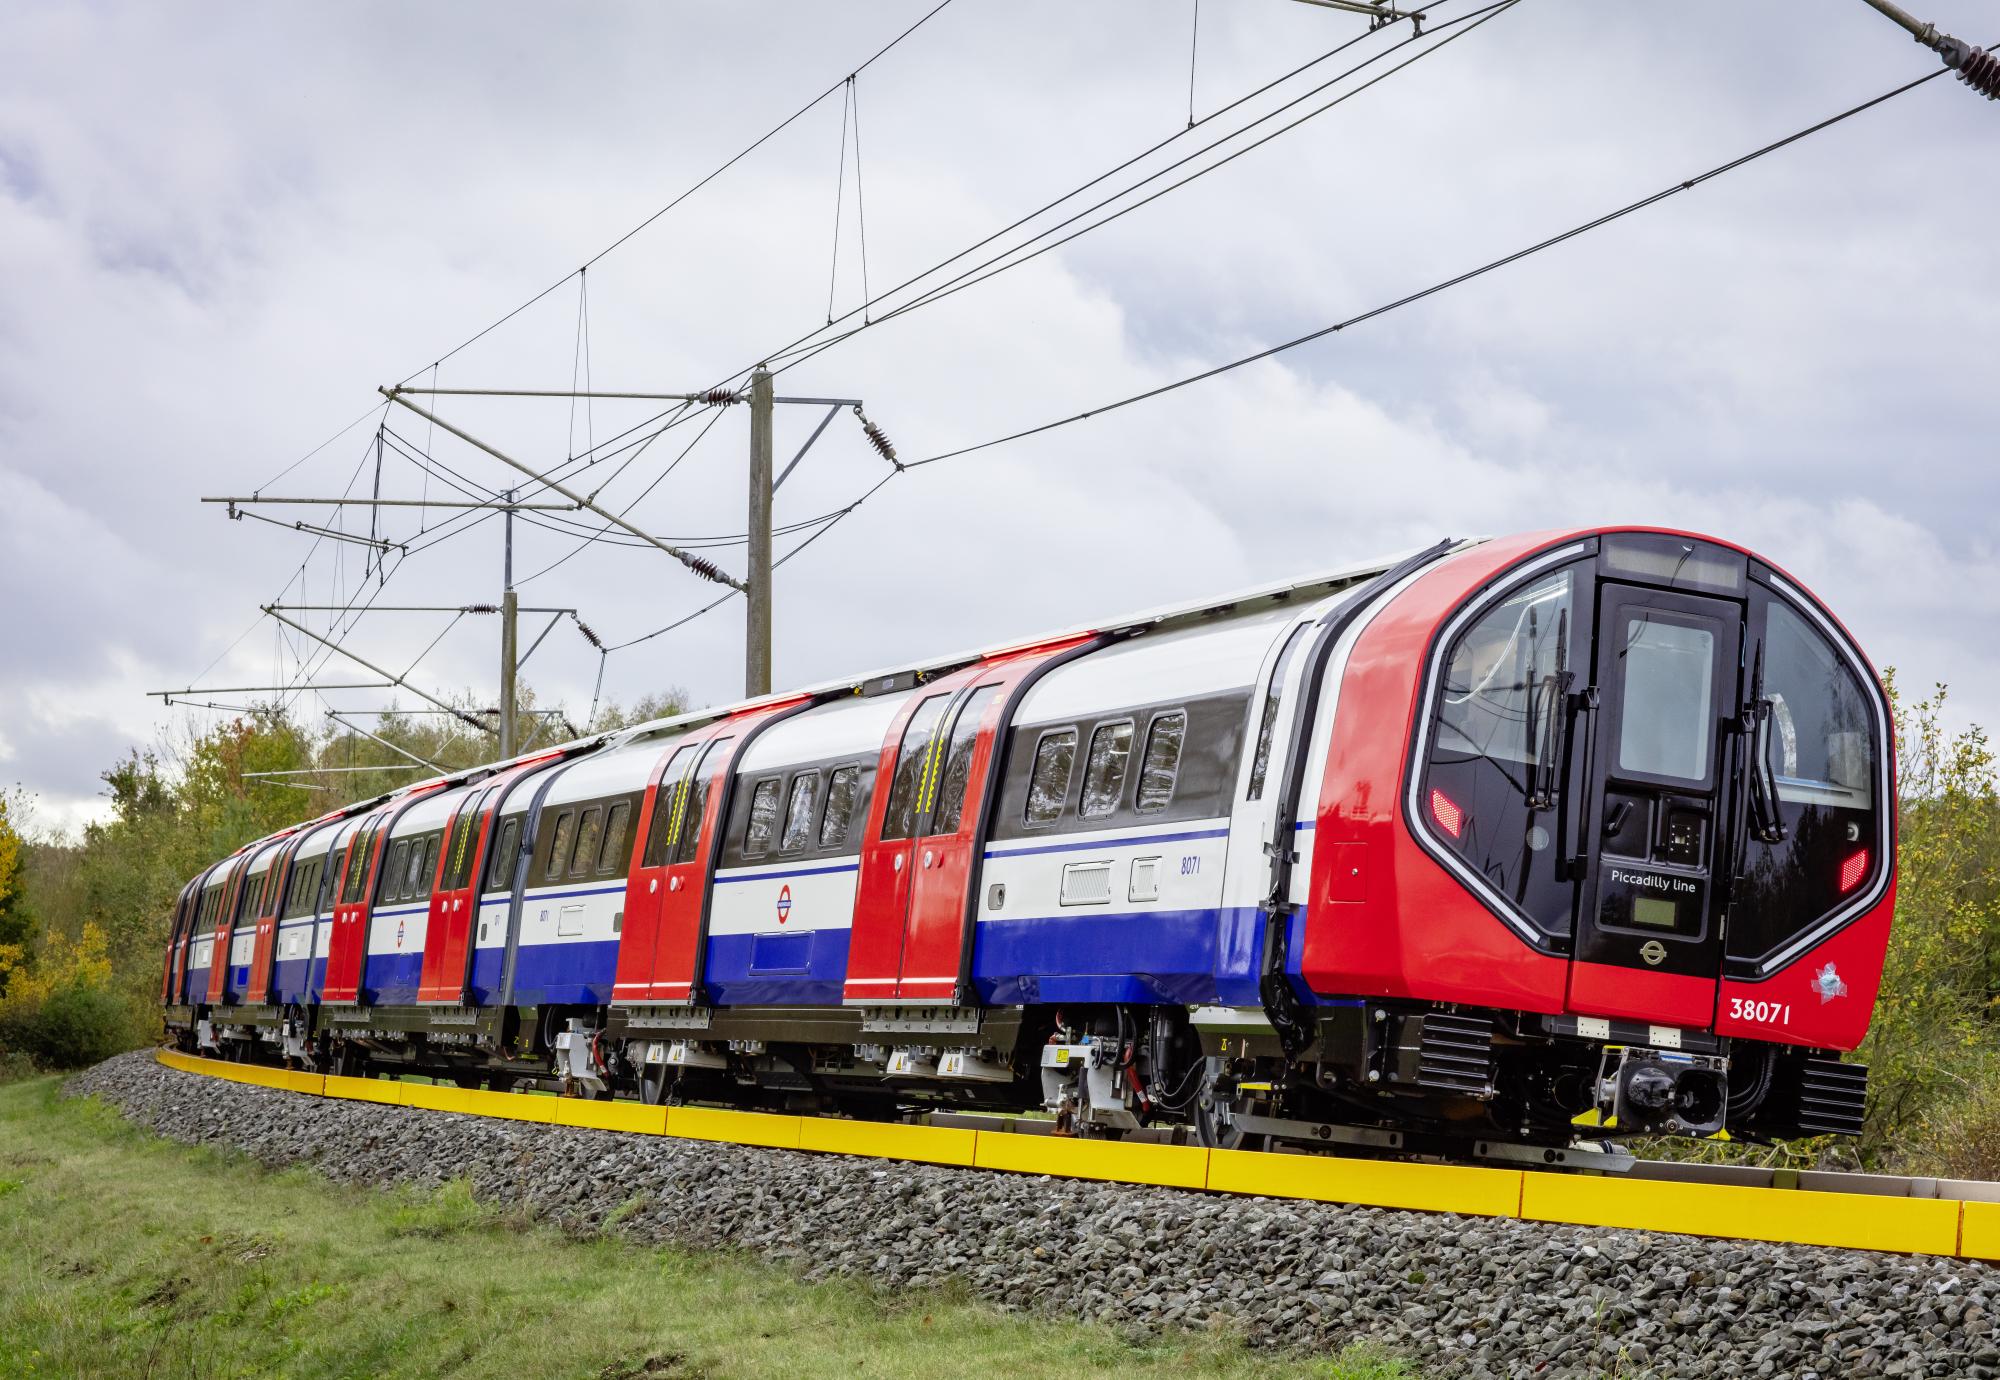 New Piccadilly Line train being tested